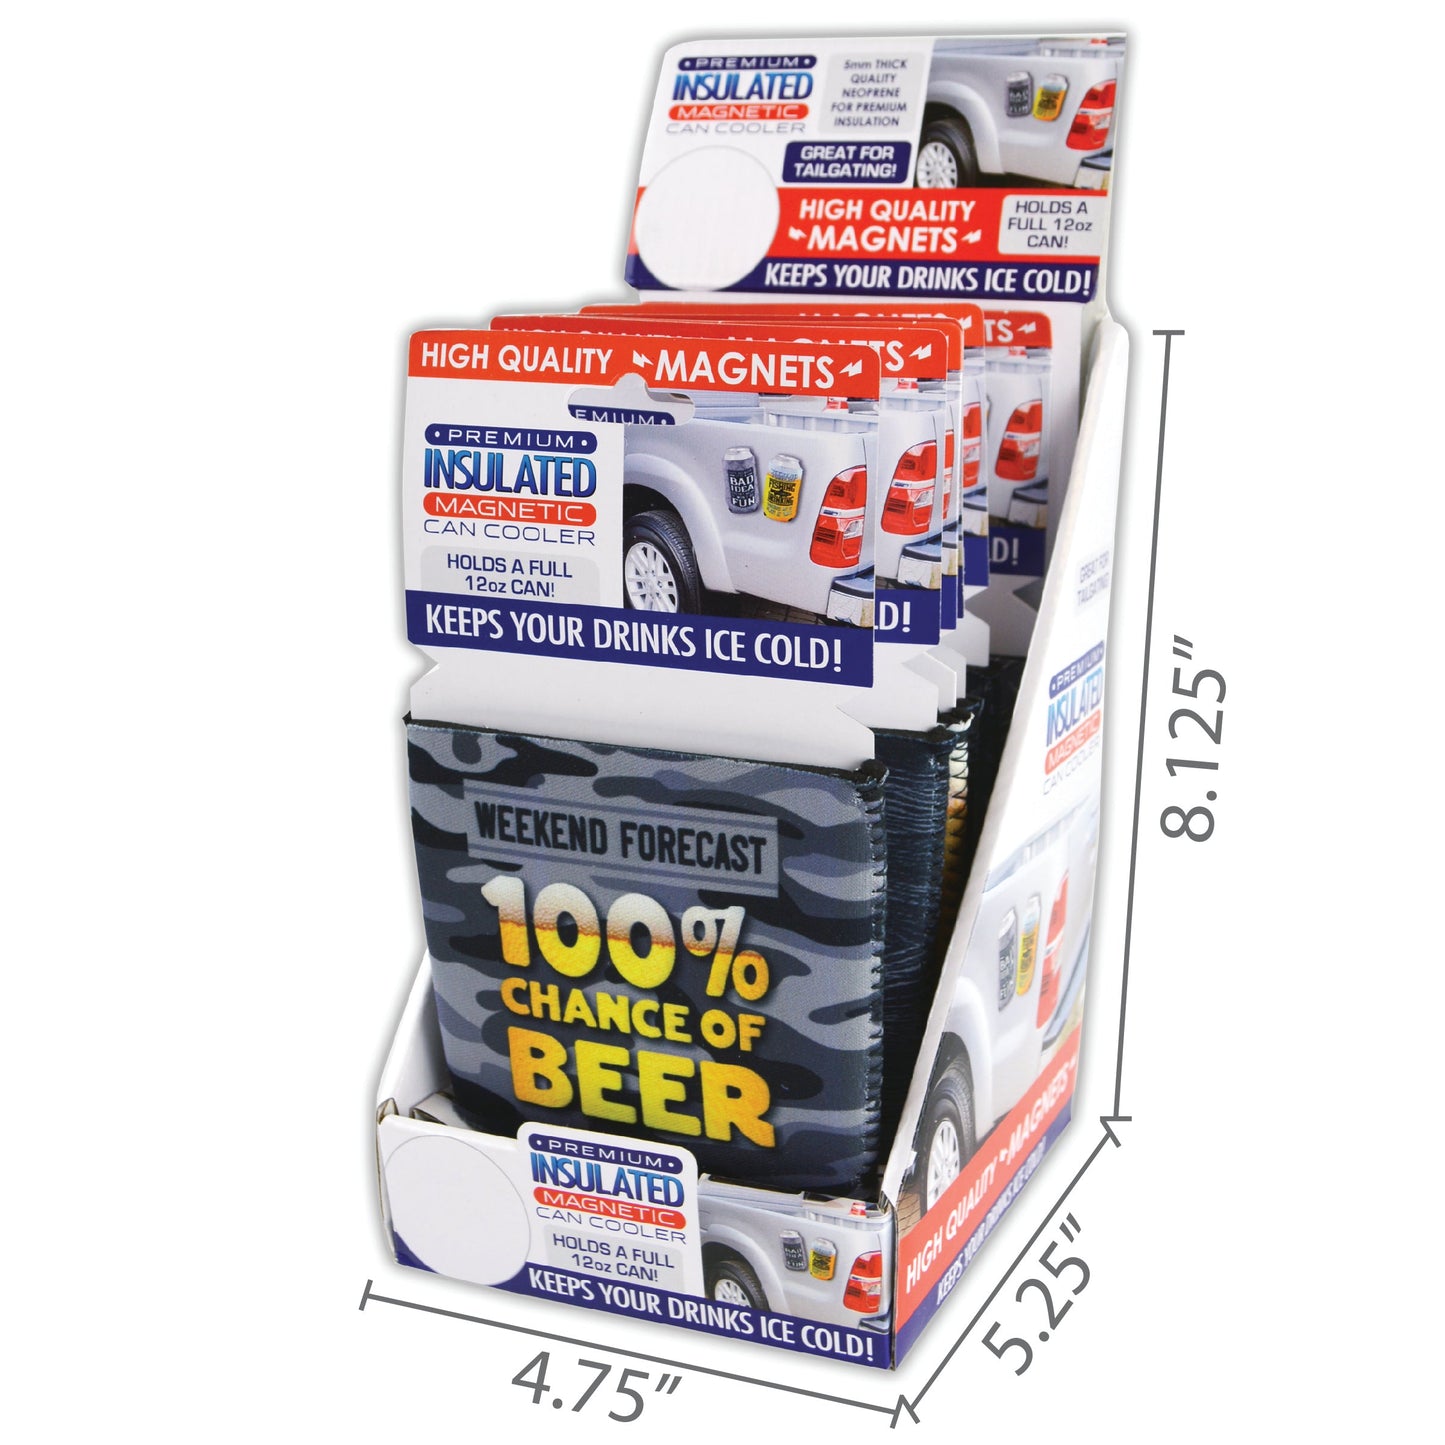 ITEM NUMBER 022428 MAGNETIC CAN COOLER 6 PIECES PER DISPLAY